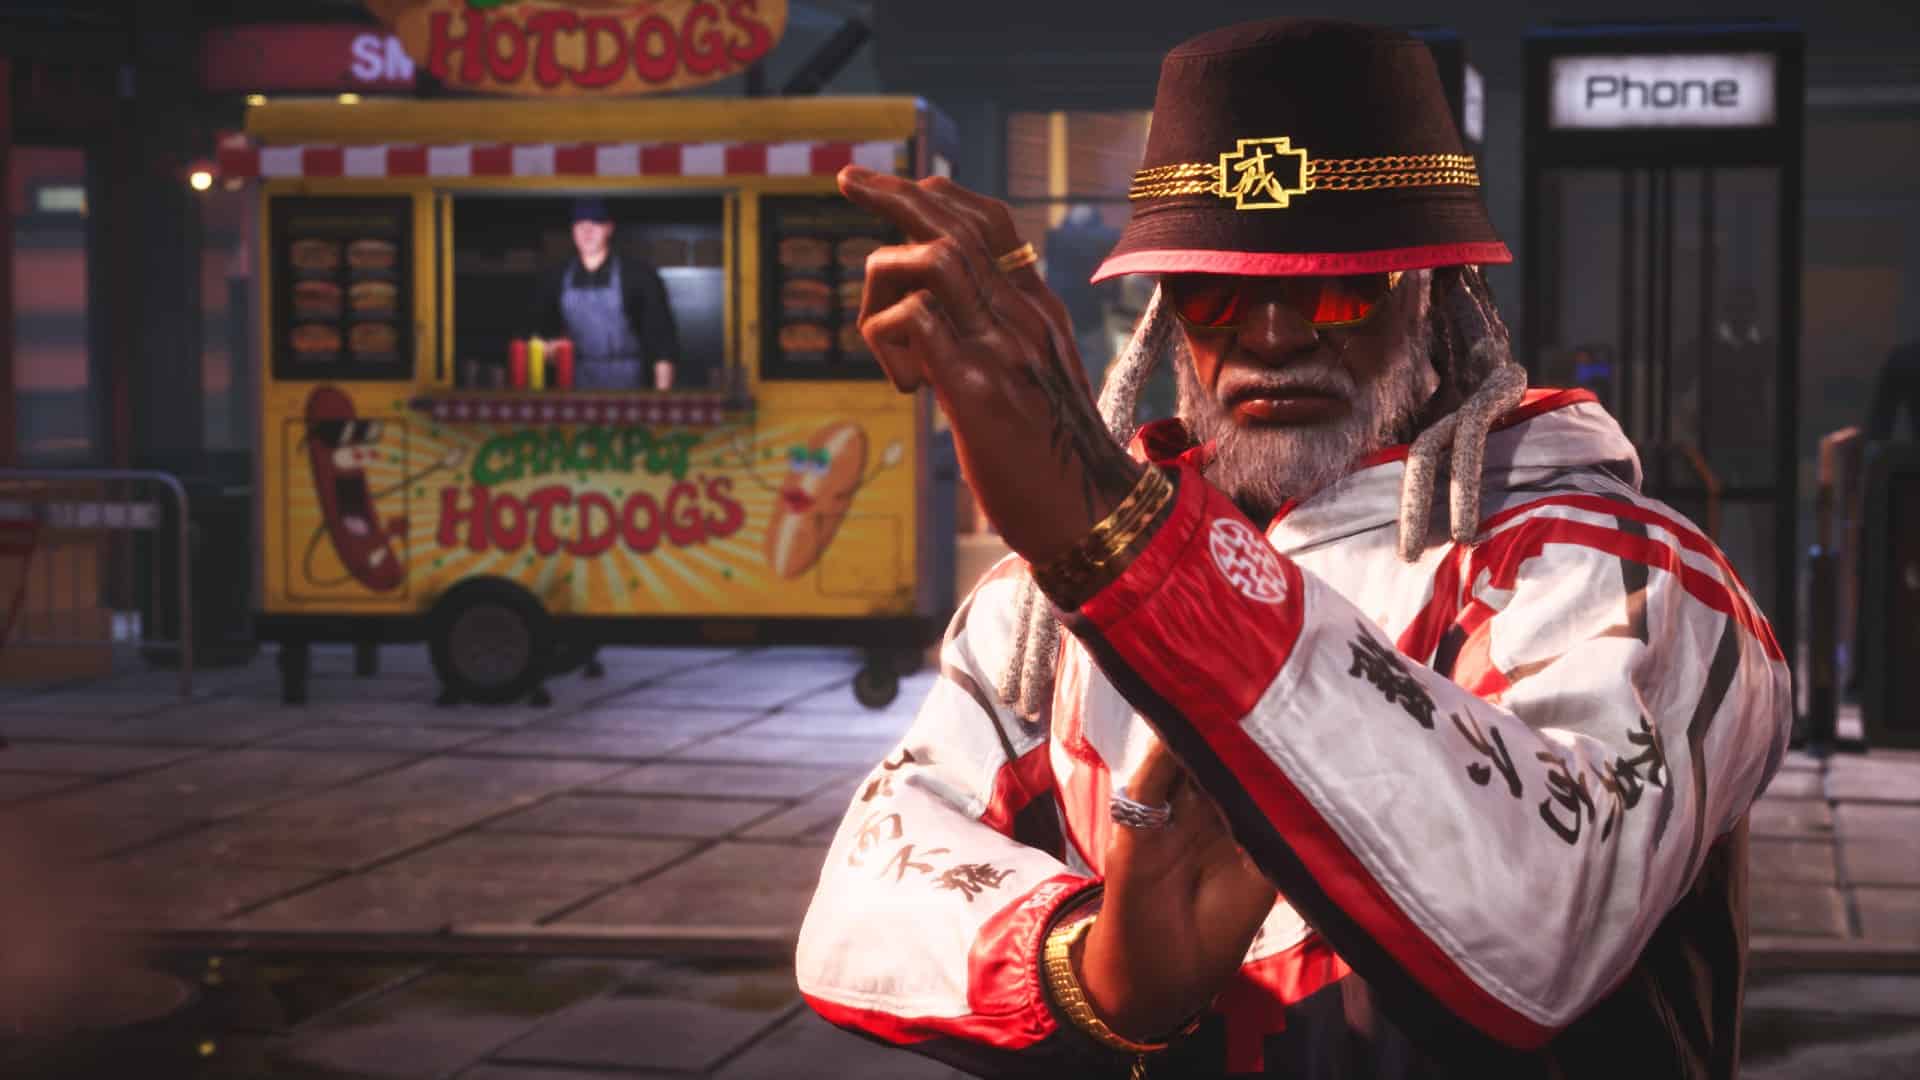 Tekken 8 Leroy: Leroy in a fight stance in front of a hot dog stand.